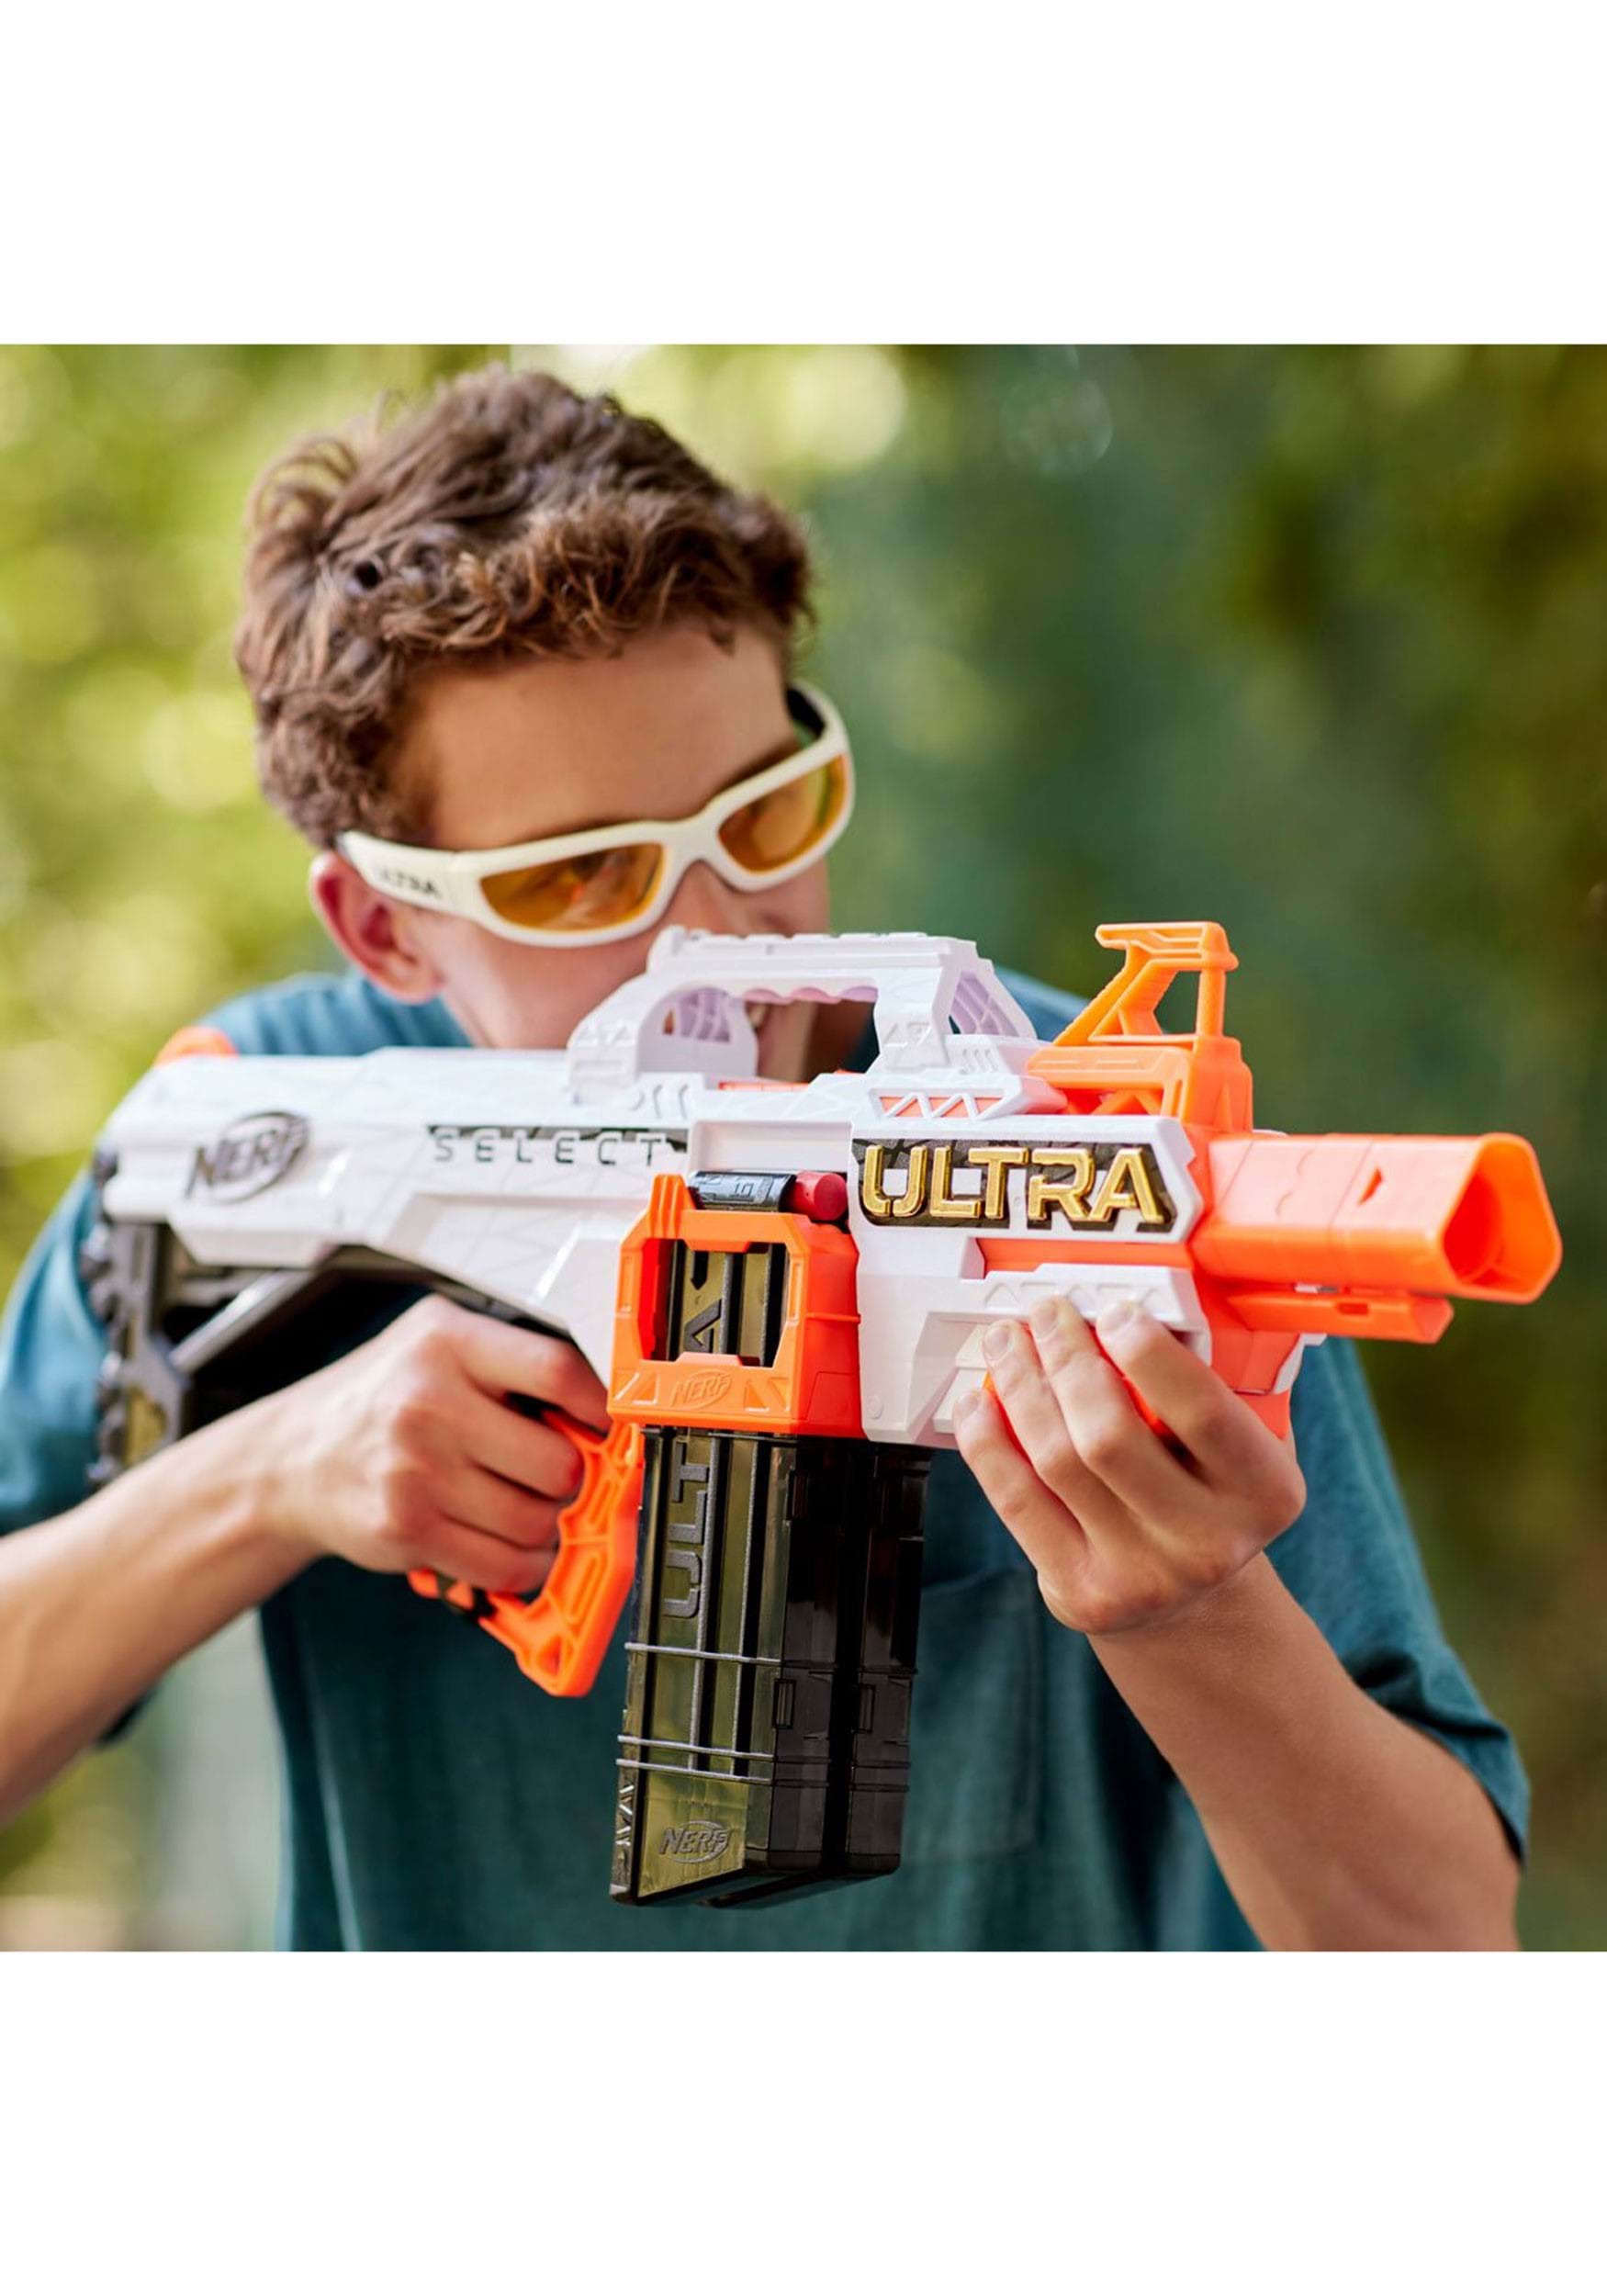 Select Blaster from Nerf